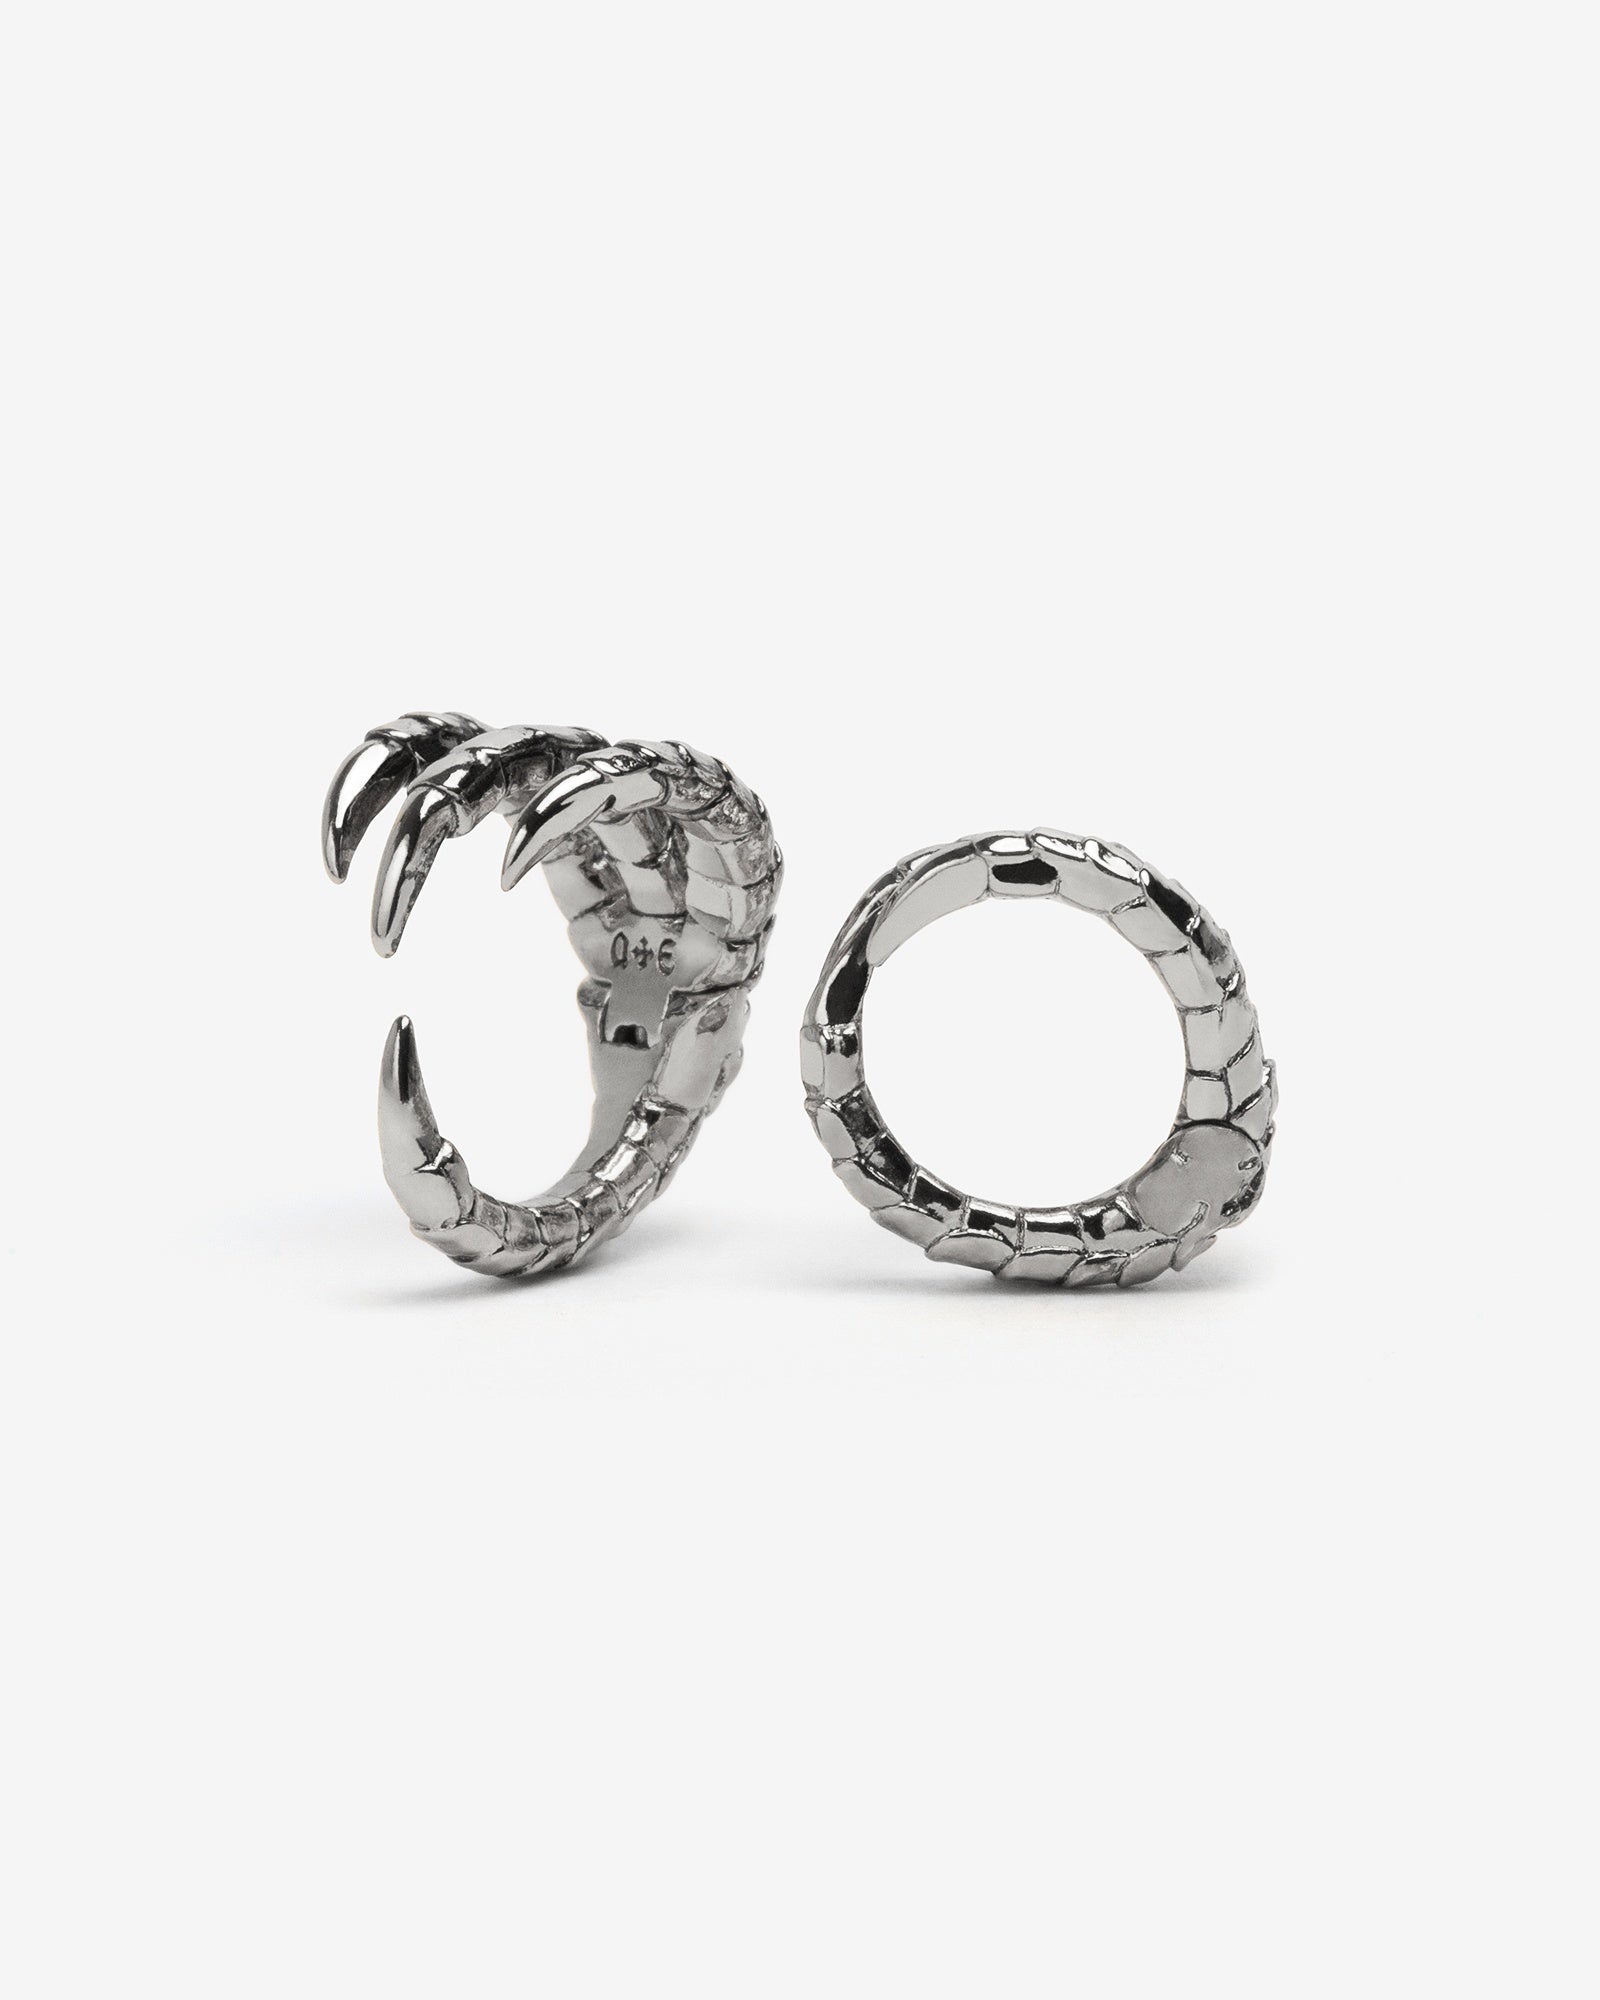 Quell Claw Lobe Cuffs in Gold - Stretched Ear Jewelry by Ask & Embla